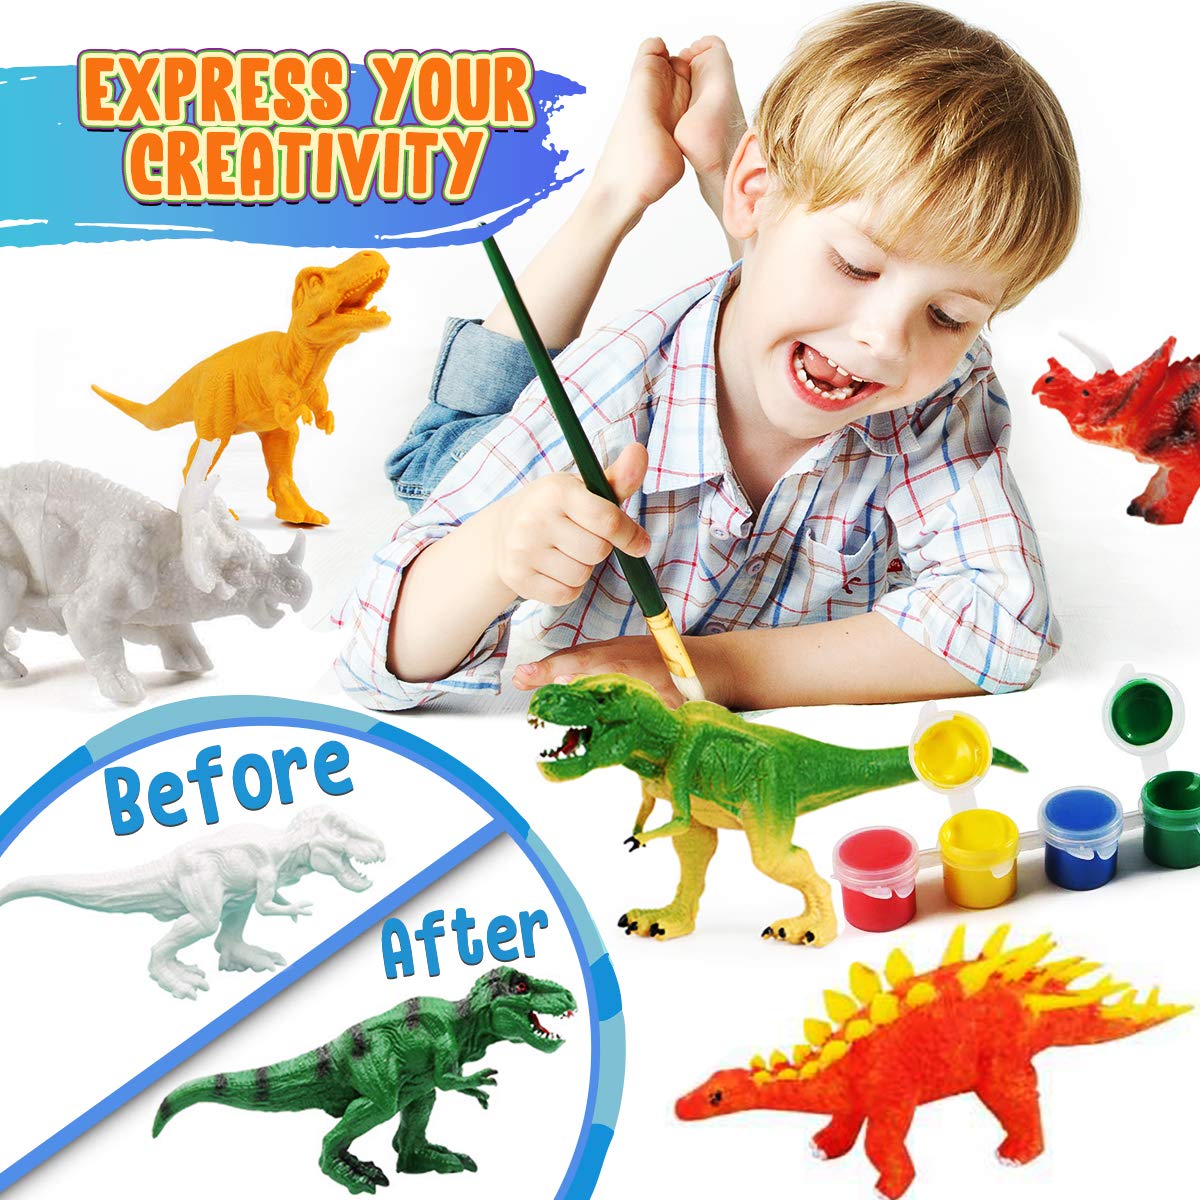 FUNZBO Kids Crafts and Arts Set Painting Kit - Dinosaurs Toys Art and Craft Supplies Party Favors for Boys Girls Age 4 5 6 7 Years Old Kid Creativity DIY Gift Set